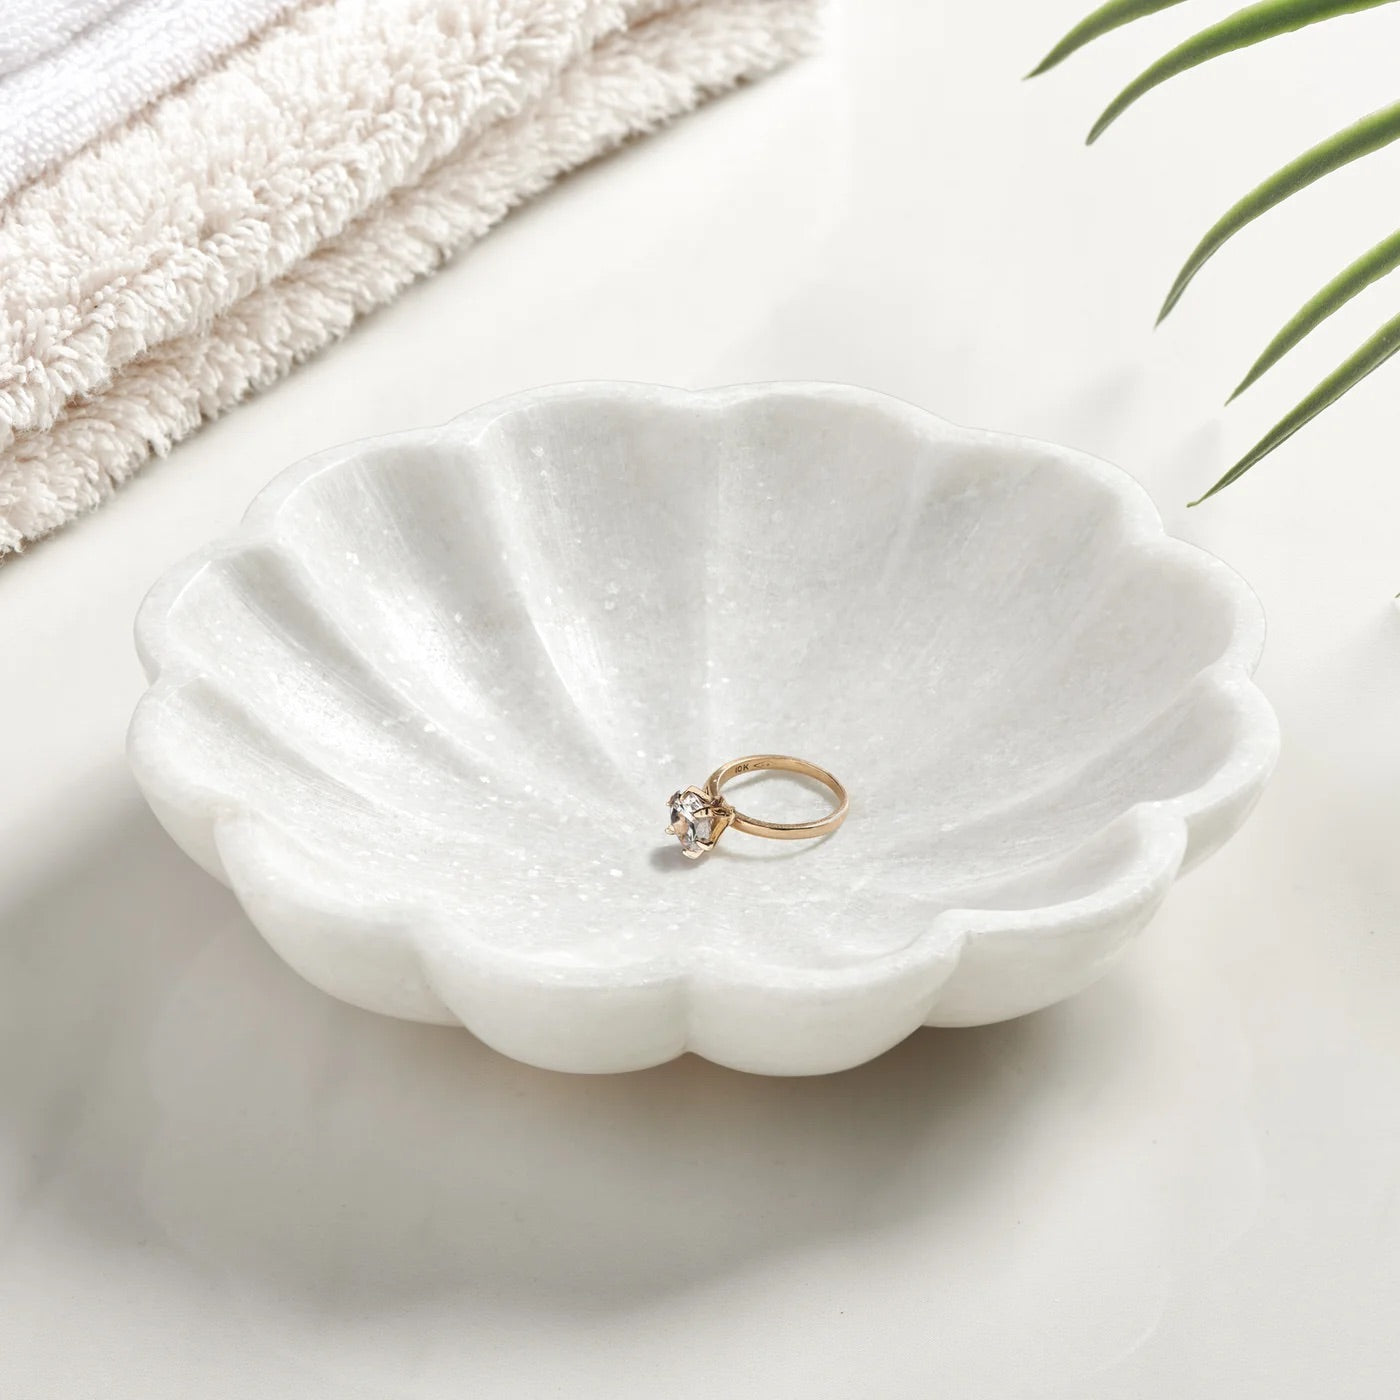 SOAP DISH - MARBLE FLOWER